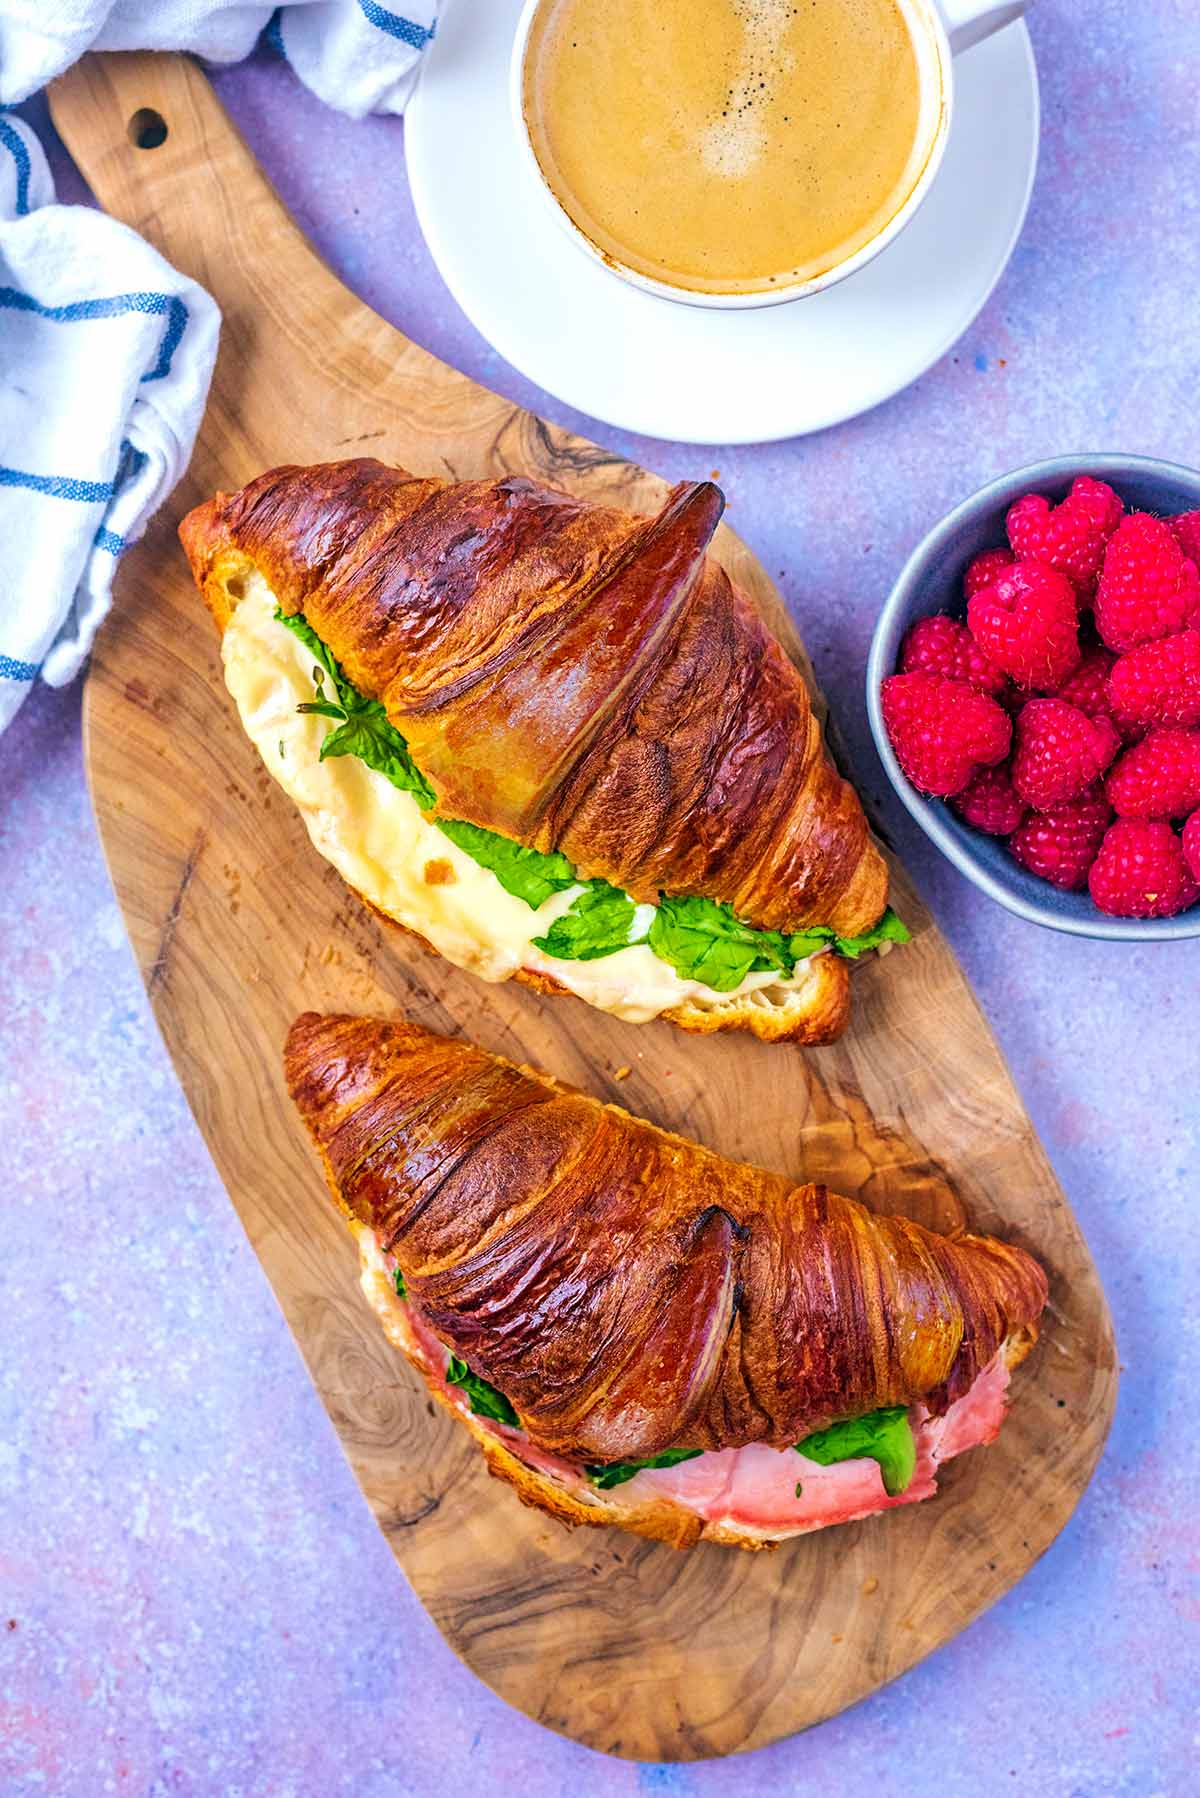 Two stuffed croissants on a wooden serving board.